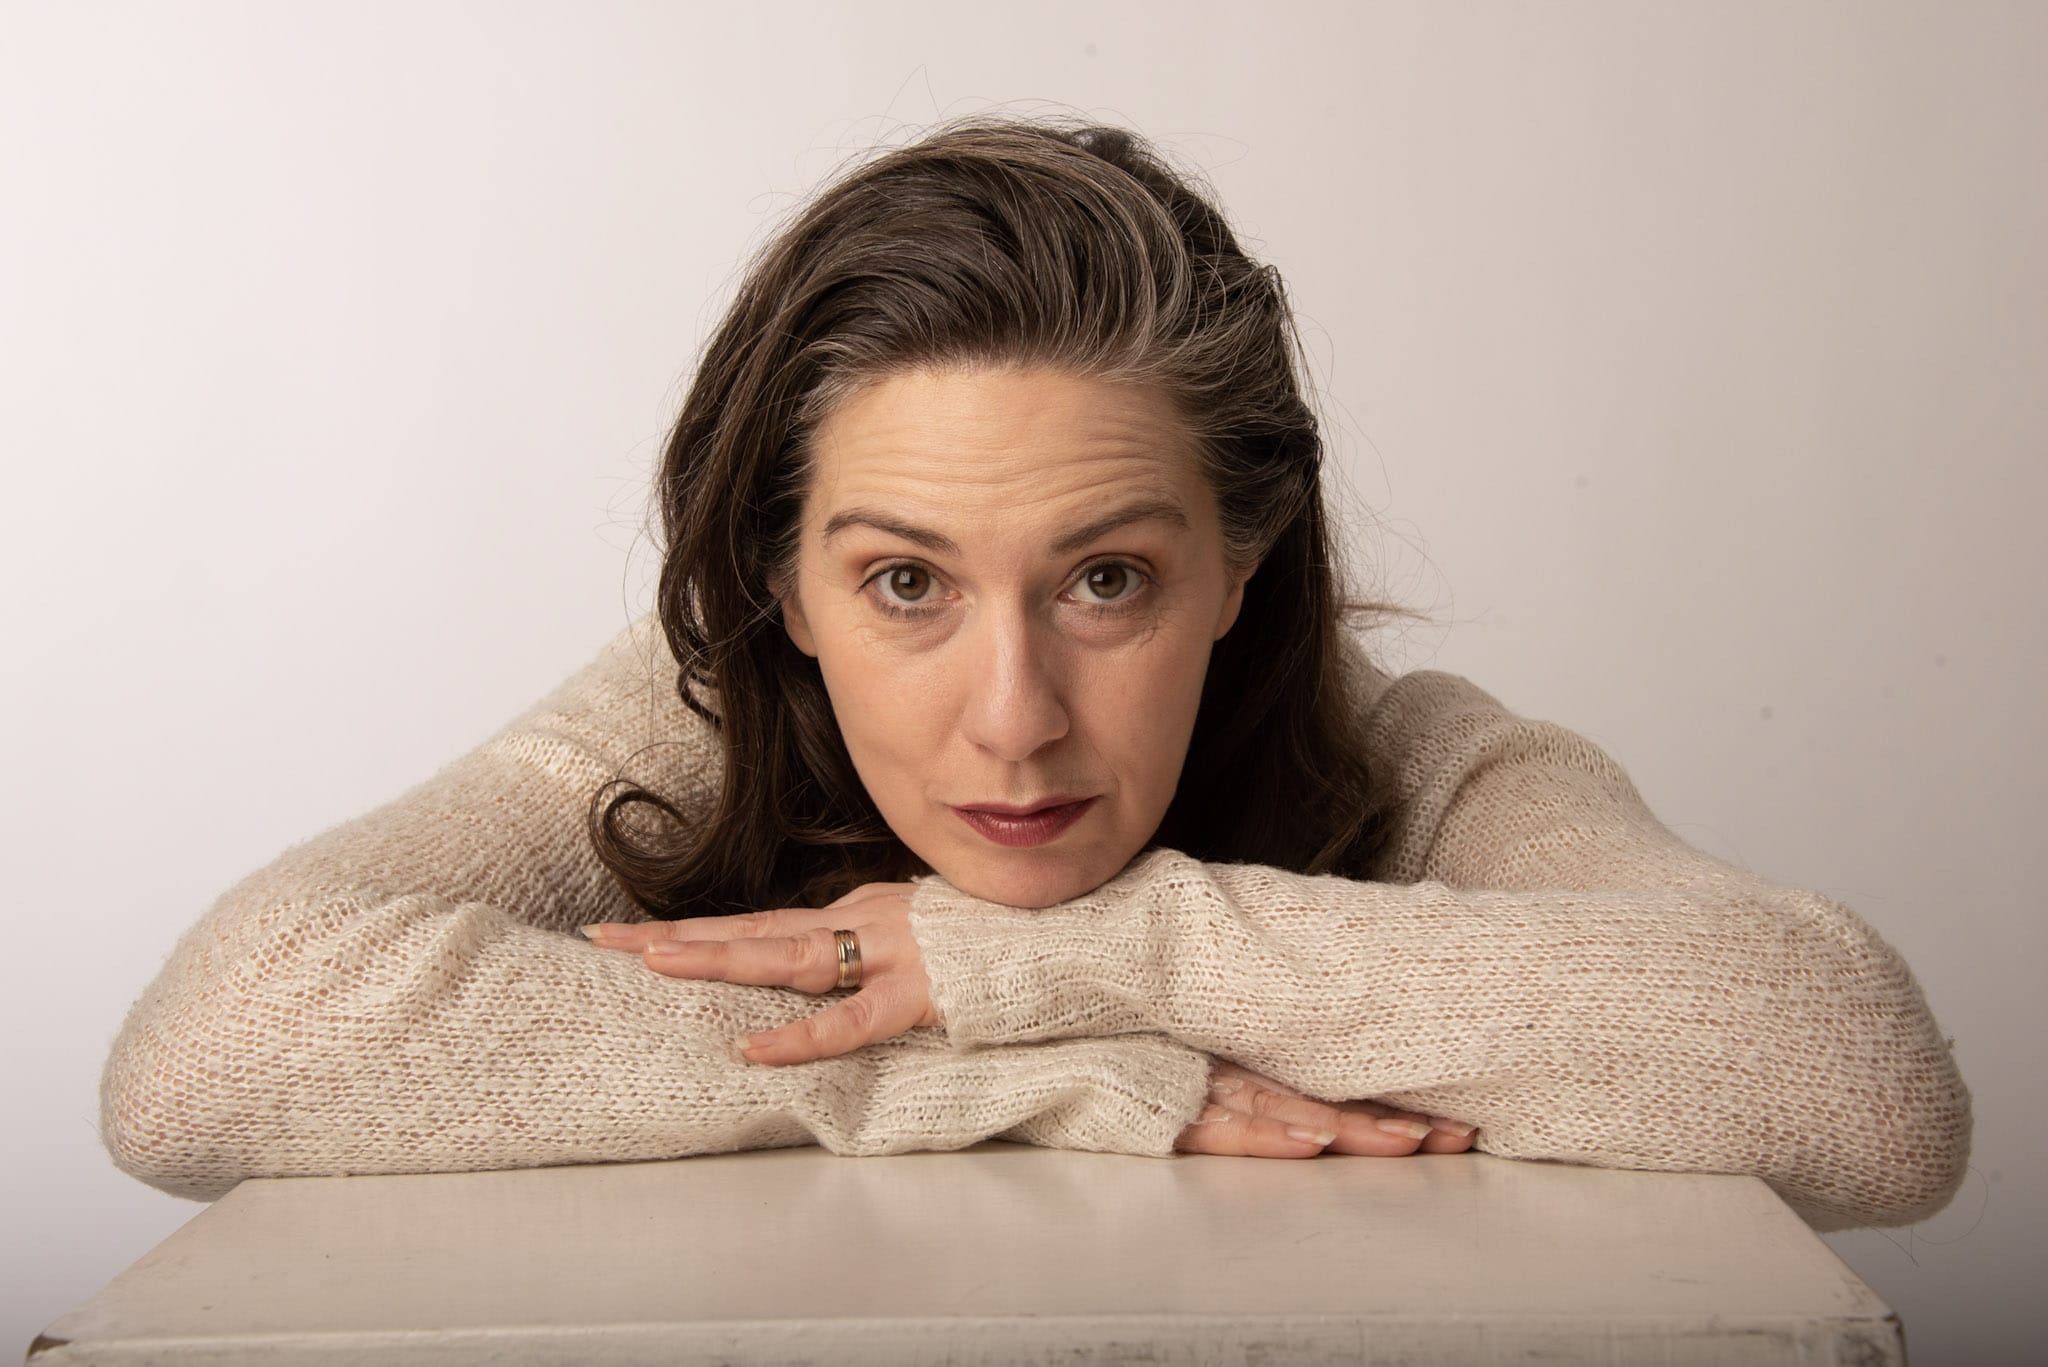 Comedian Meryl O'Rourke poses leaning forward with her chin atop her folded hands. She is wearing a cream sweater against a cream background. She has mid-length brown hair and brown eyes.